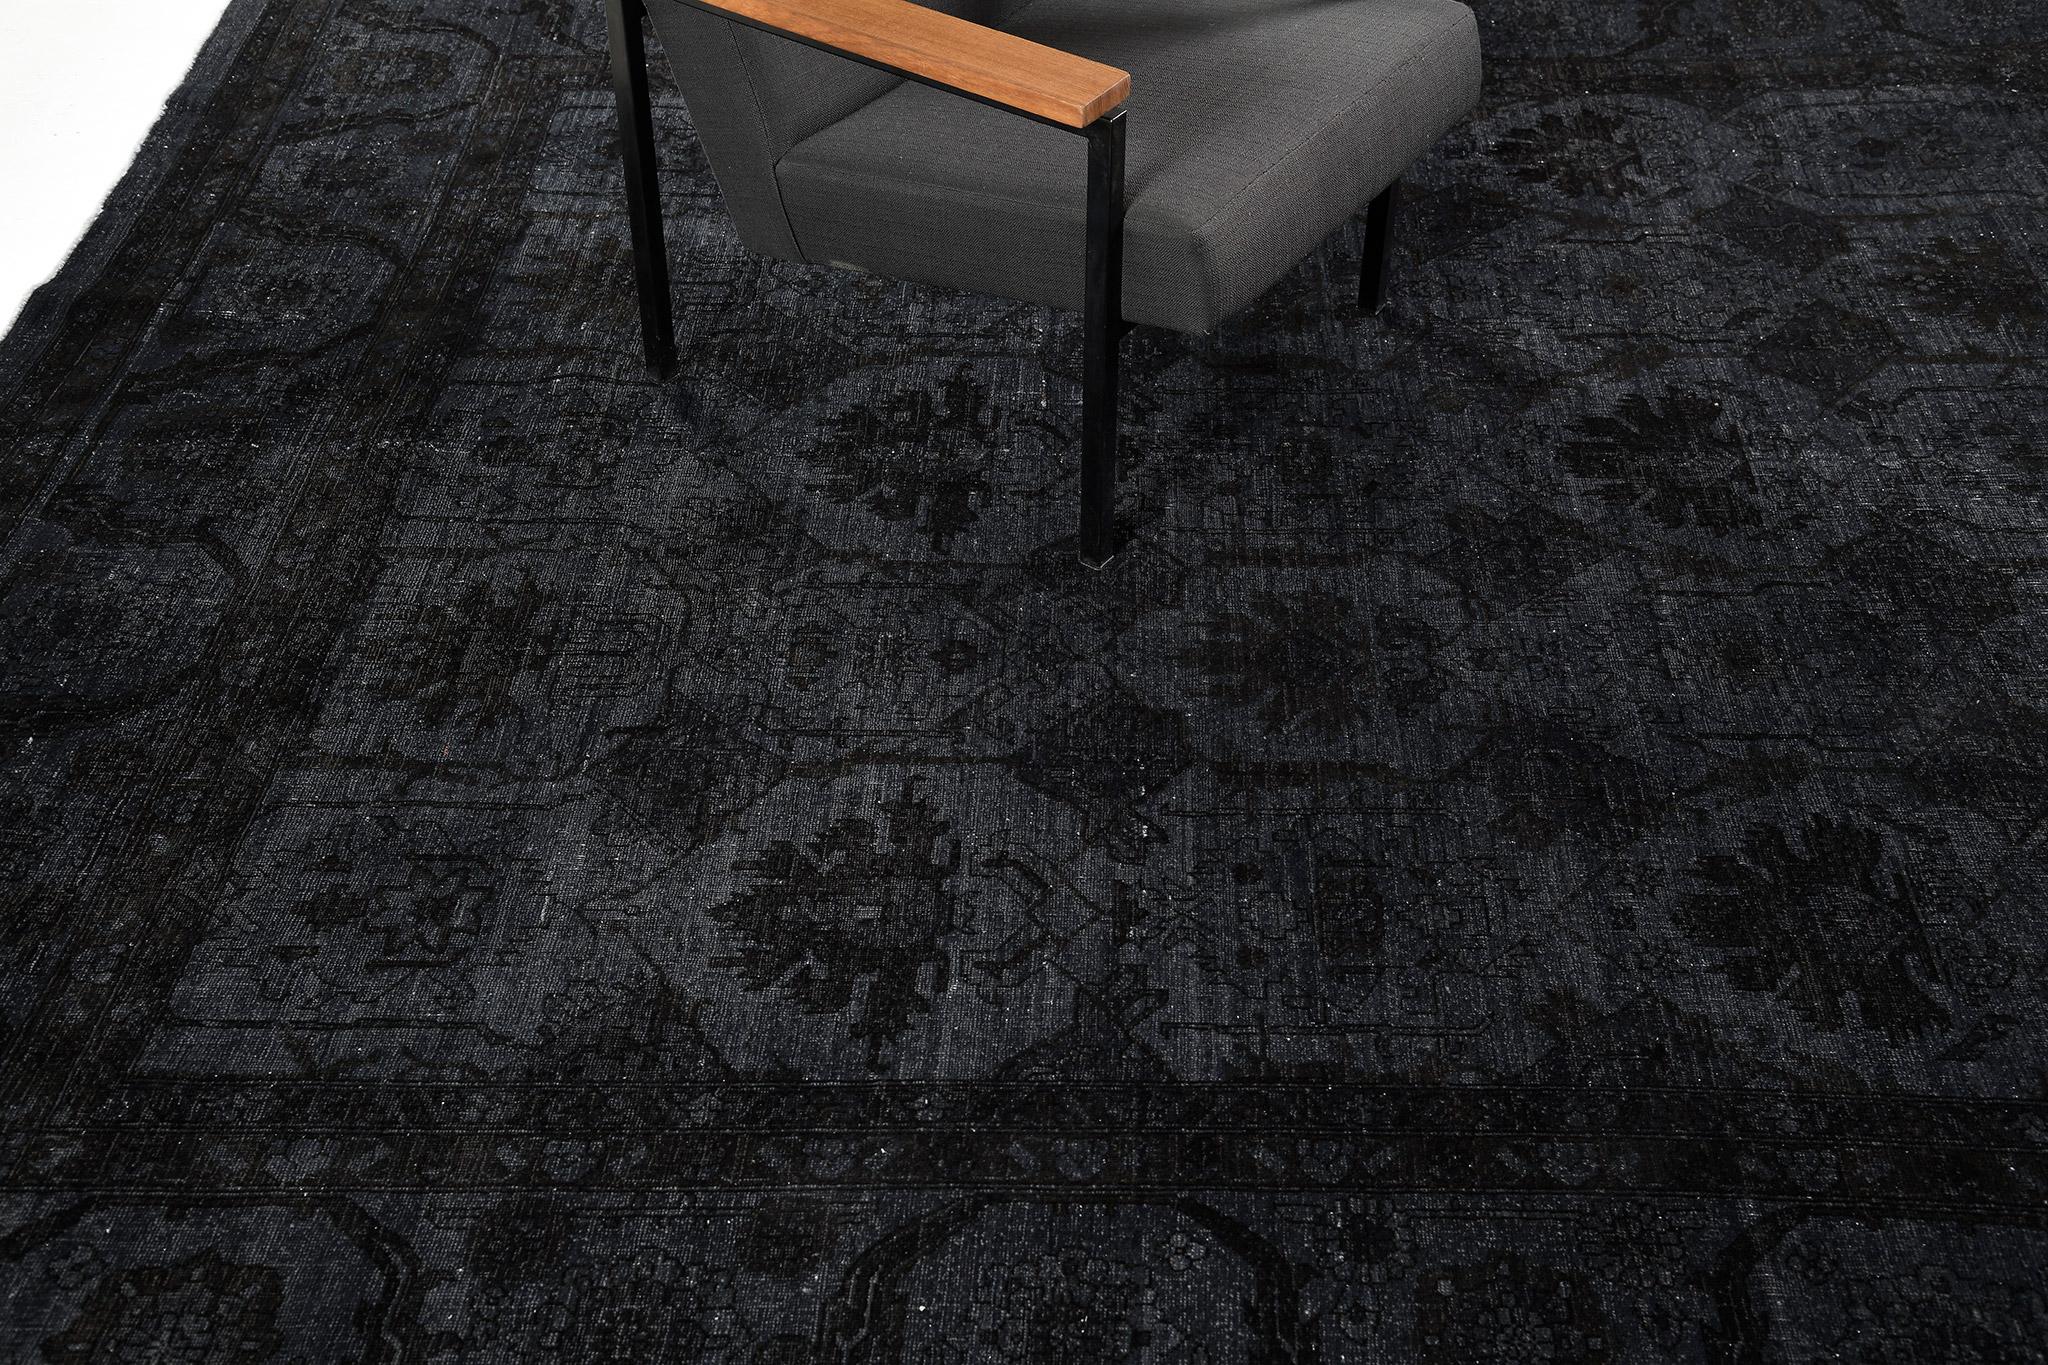 Highlighting a truly magnificent all-over compartmentalized design, this Bakshaish revival rug is a stunning statement piece. Overdyed, this rug features a panel field with alternating stylized palmettes into its majestic brilliant formations. 

Rug